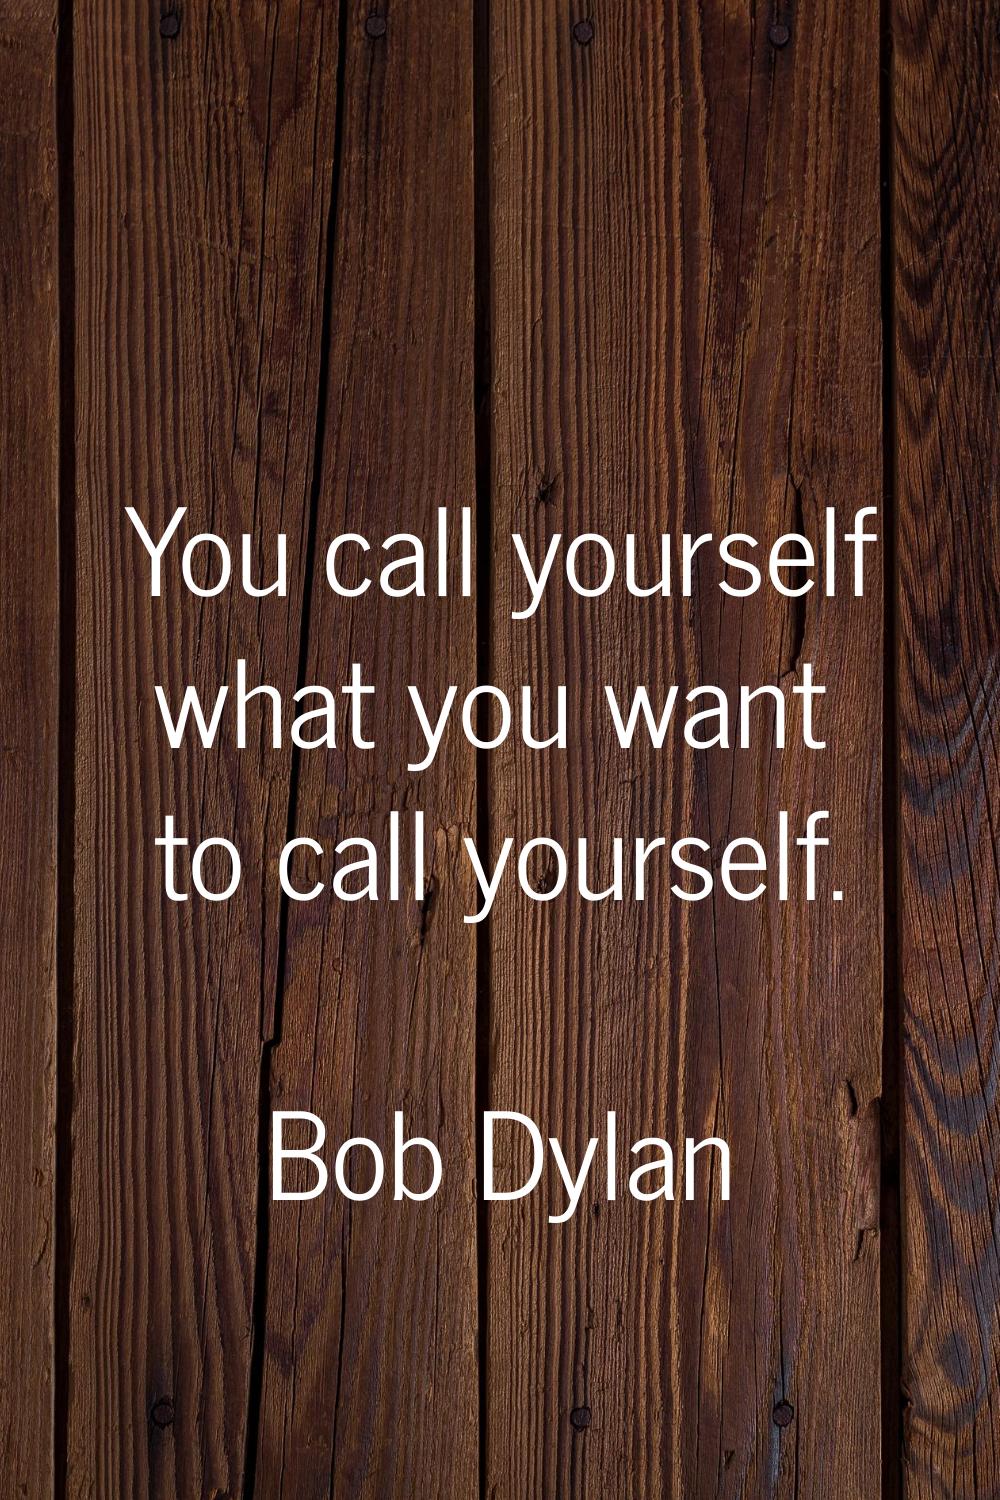 You call yourself what you want to call yourself.